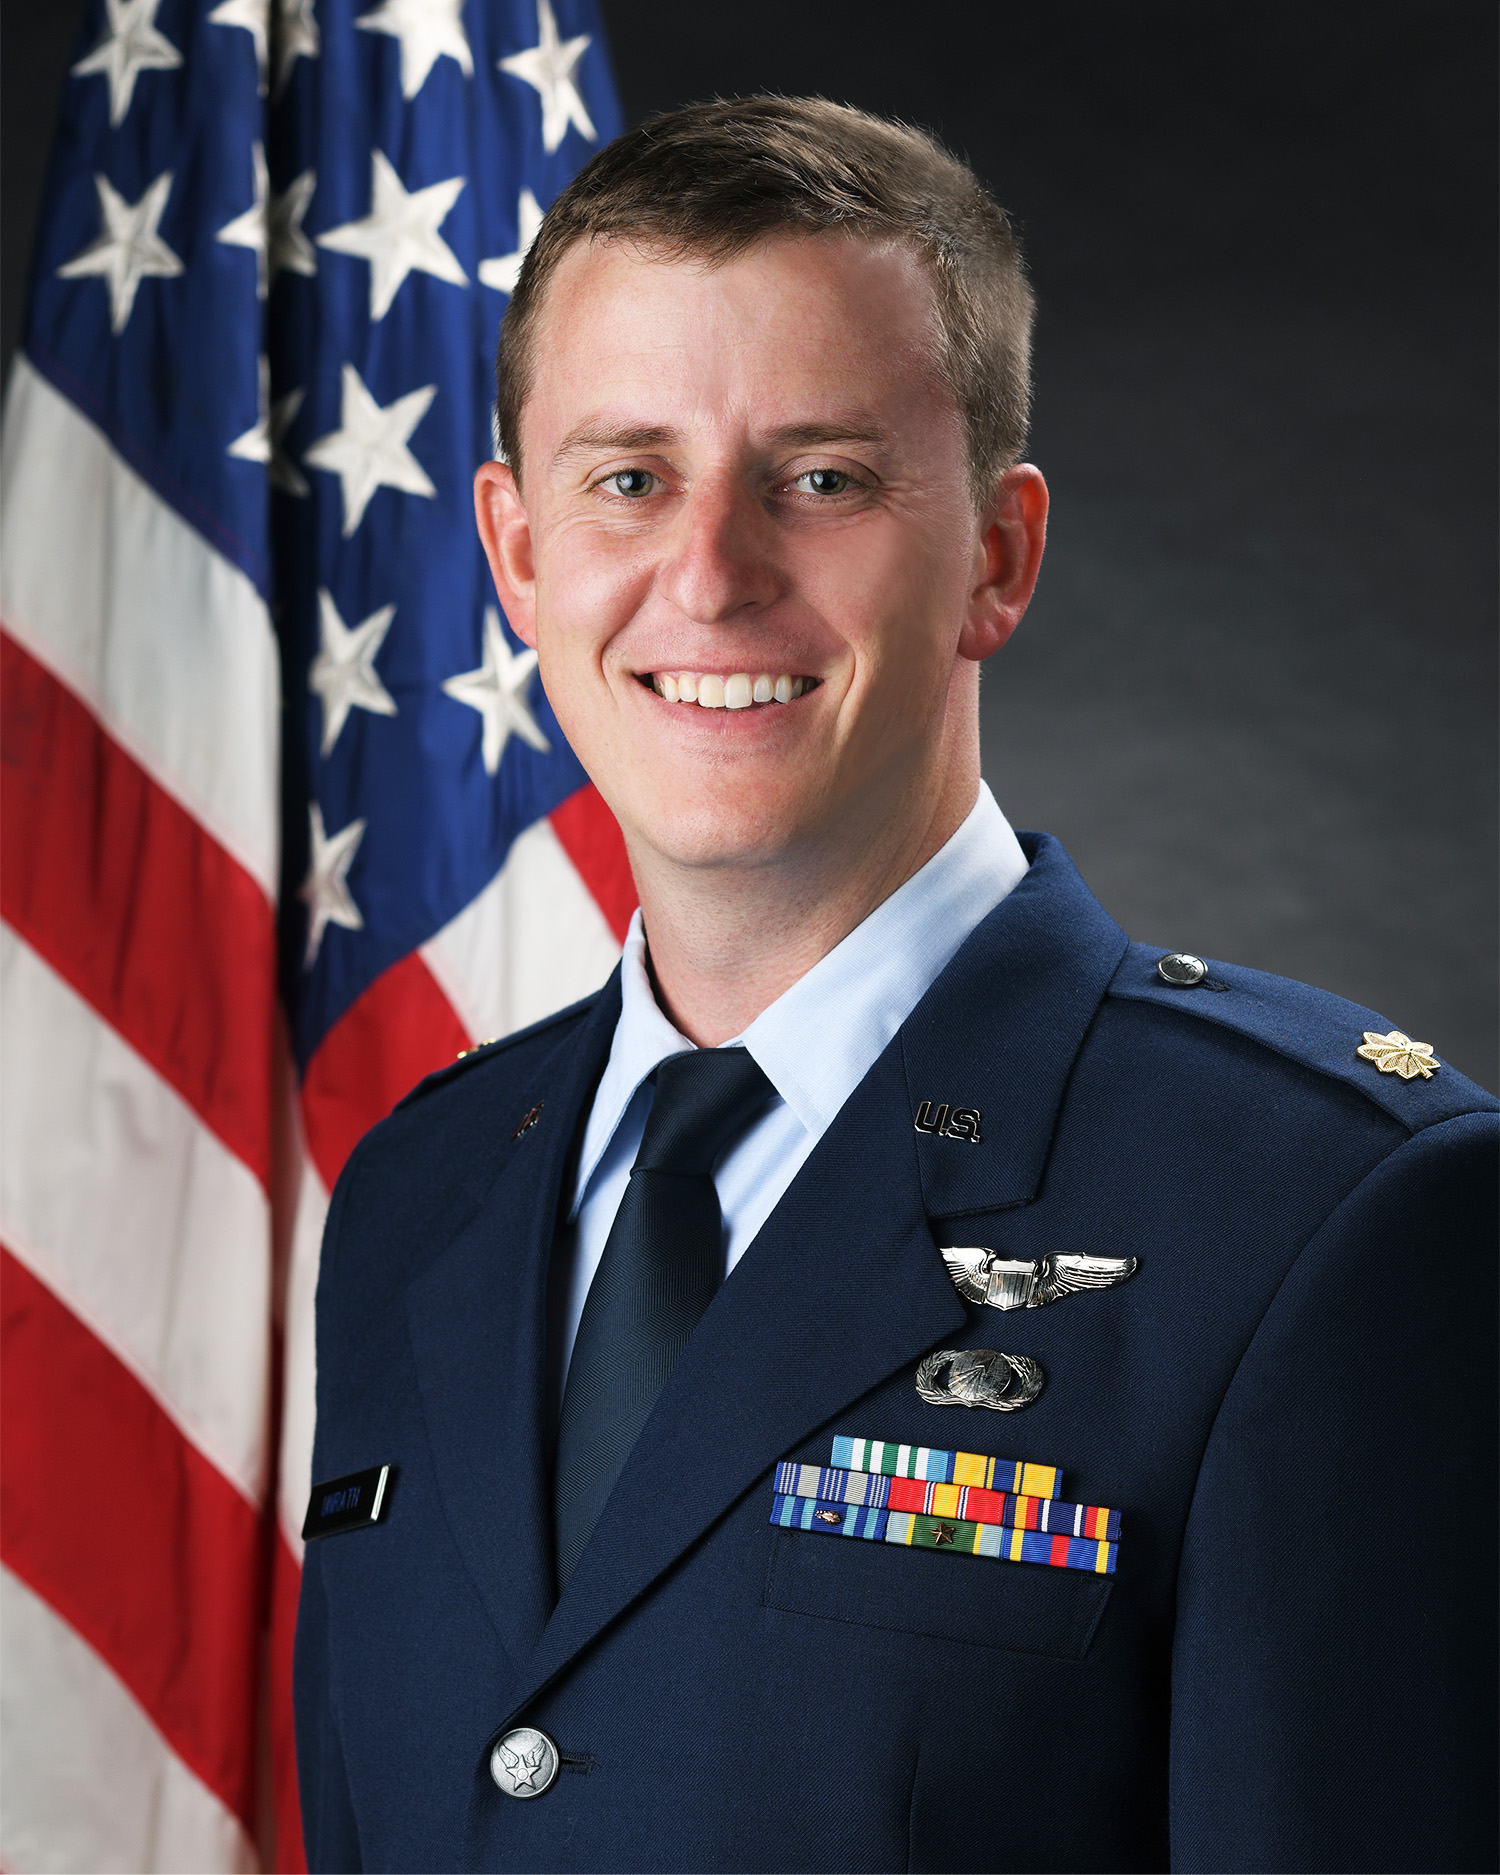 Official photo of Maj Unrath